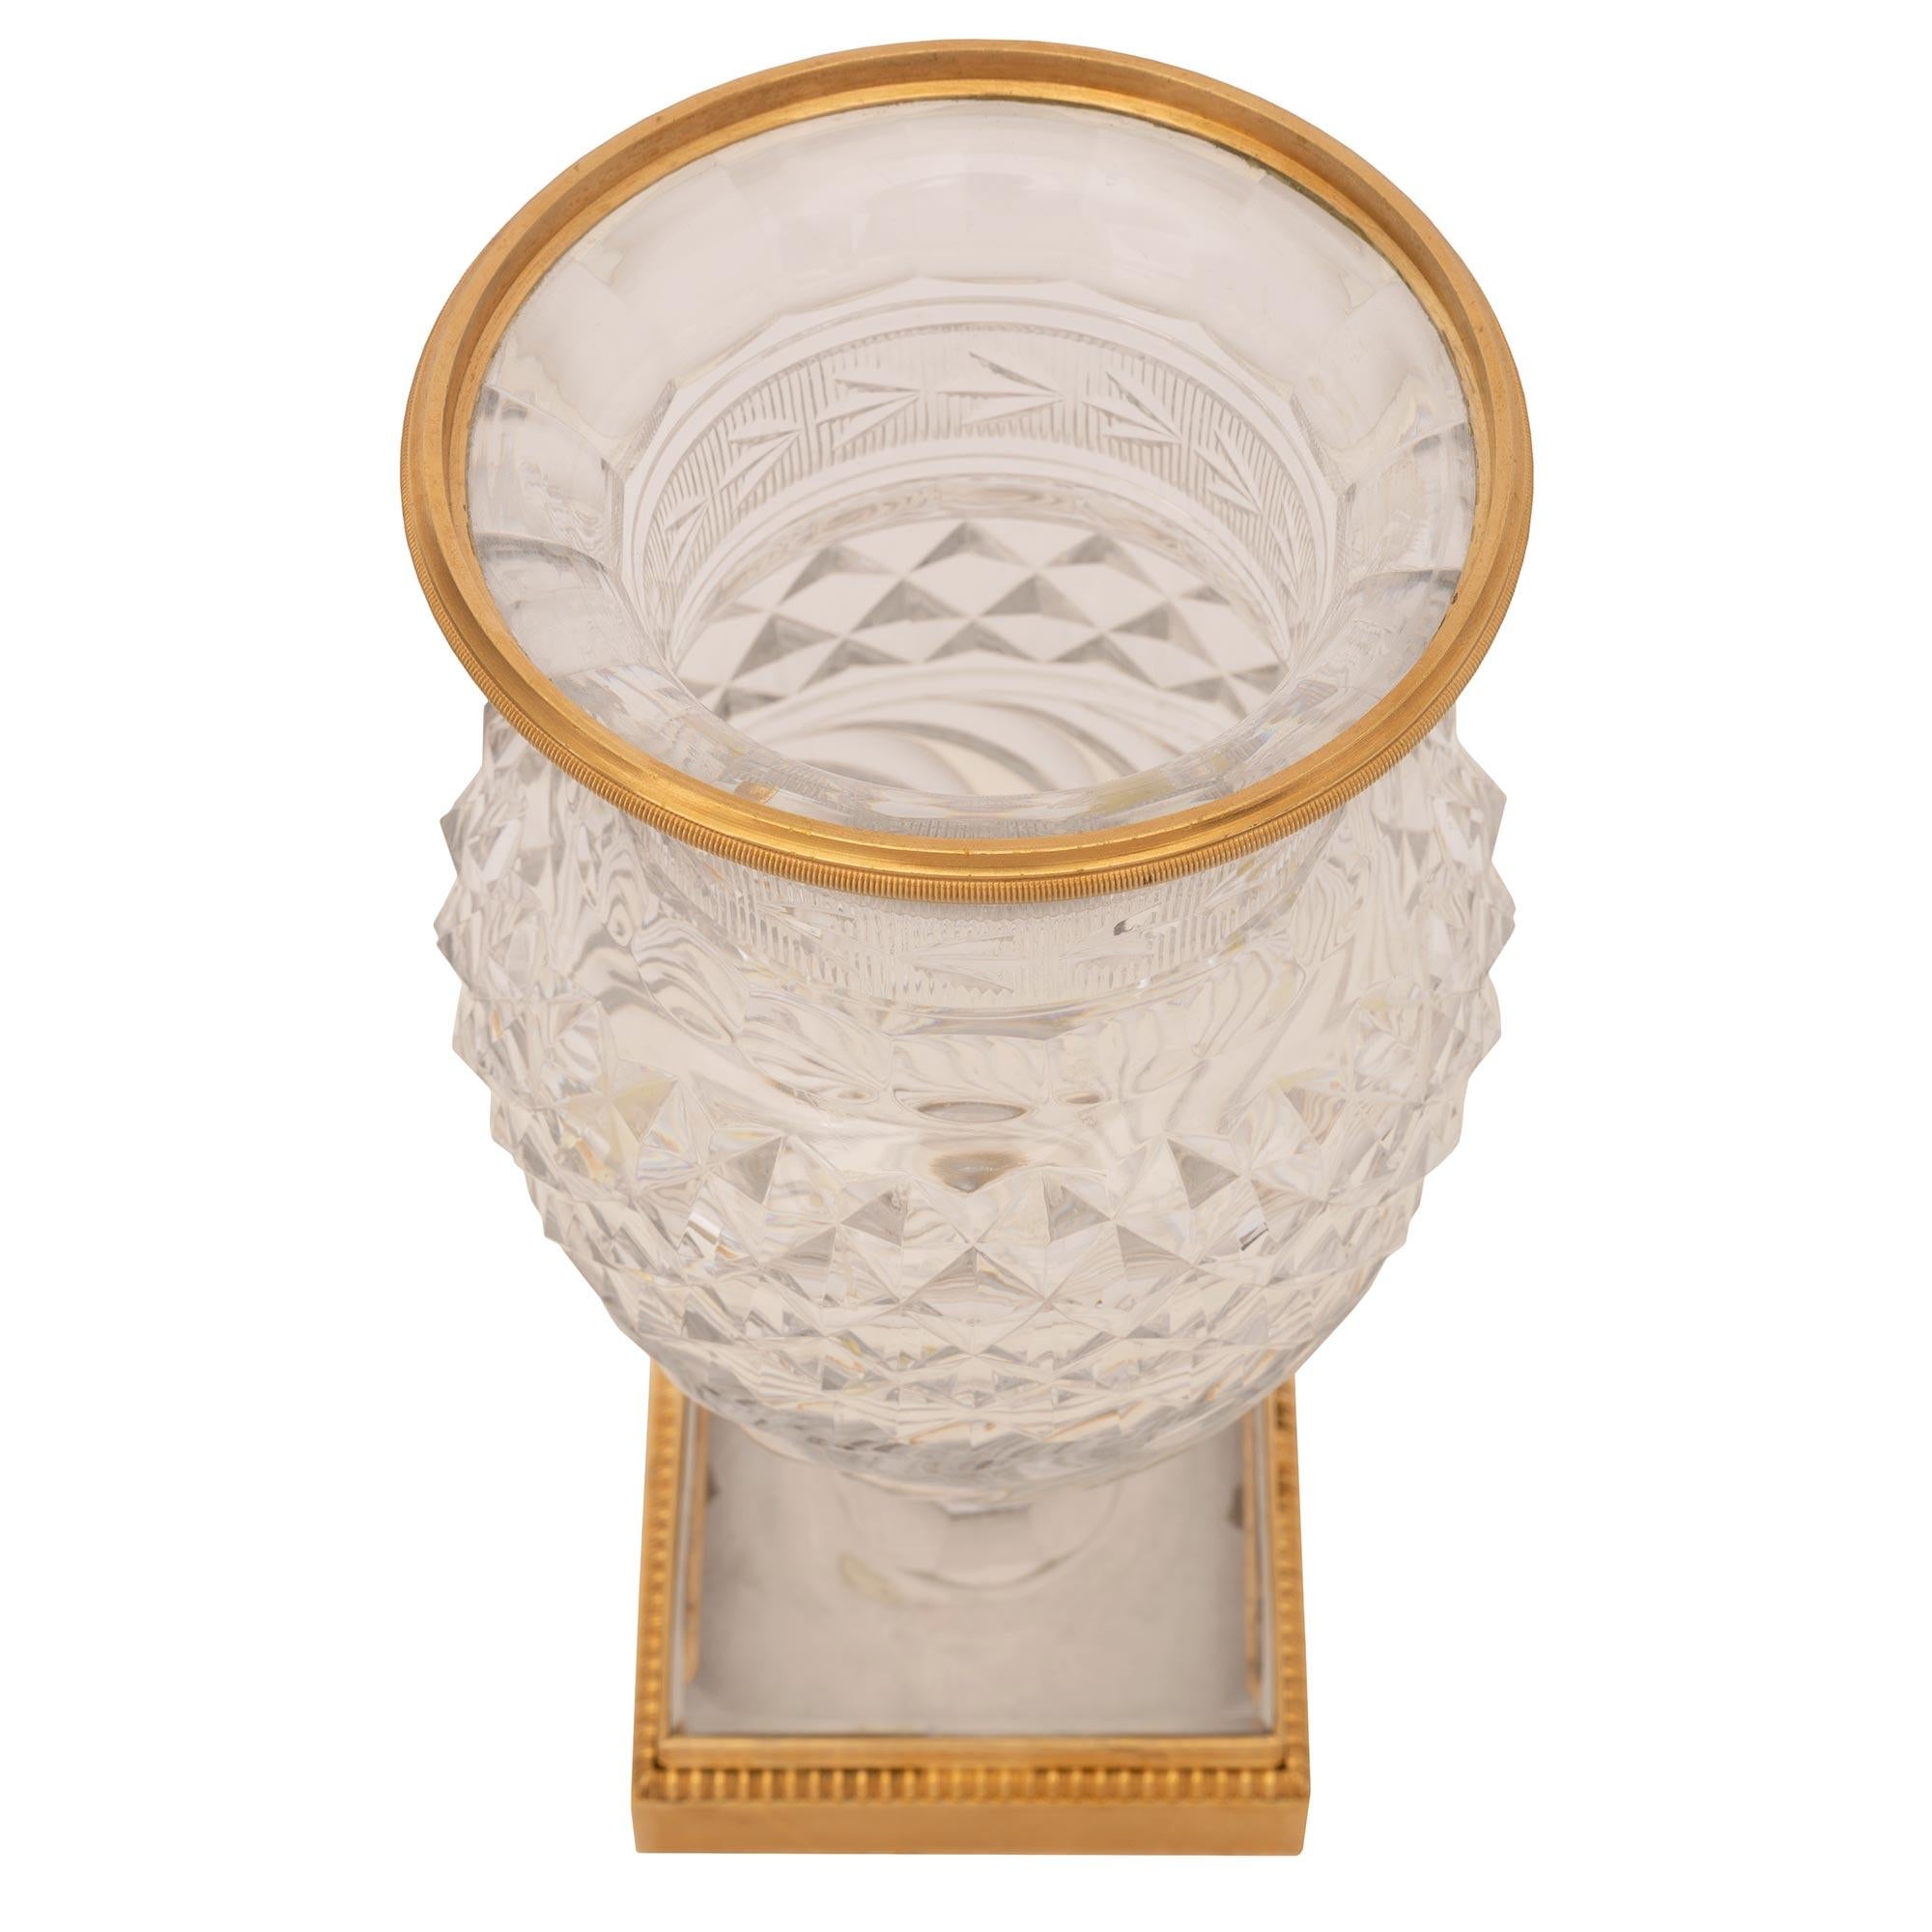 An exceptional and most elegant French 19th century Louis XVI st. Belle Époque period Baccarat crystal and ormolu potpourri vase. The vase is raised by a fine square ormolu base with a textured design framed within a delicate fillet and a lovely